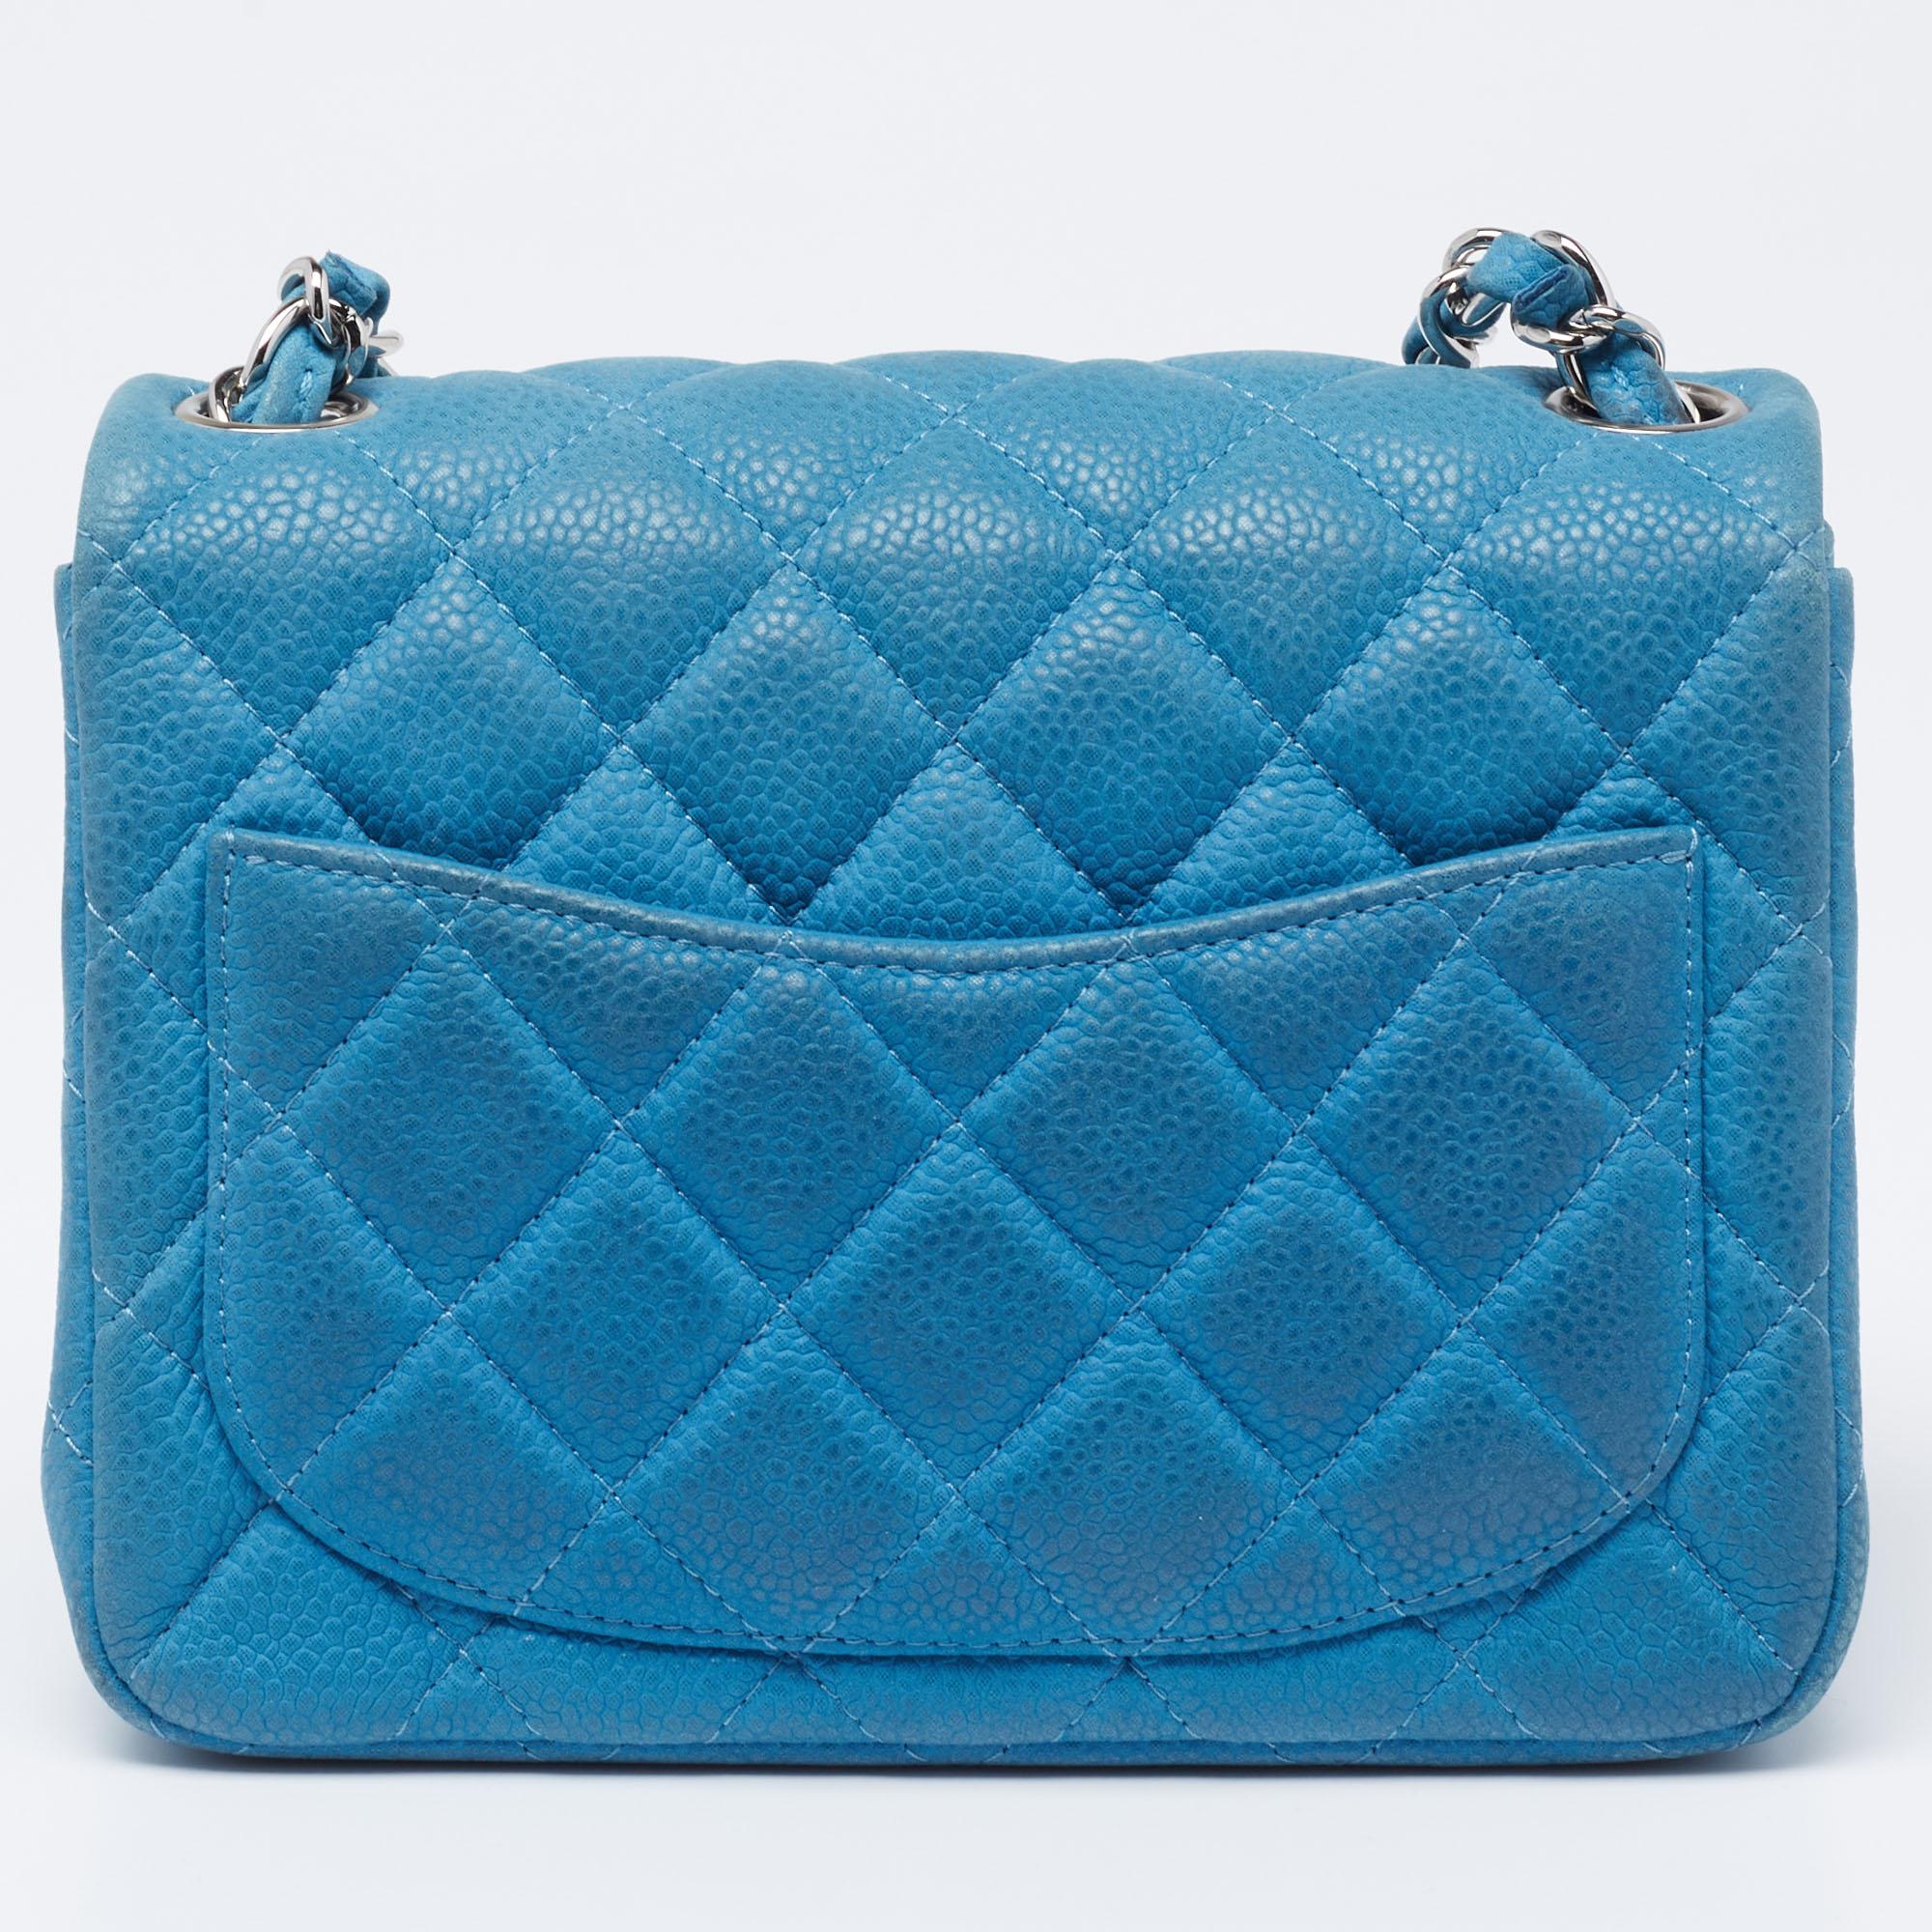 The House of Chanel knows best how to craft high-value, upscale pieces that gain popularity in no time. Since its creation, the Classic Flap bag from Chanel has emerged as an ultra-luxurious, modern commodity. Designed using blue quilted Caviar